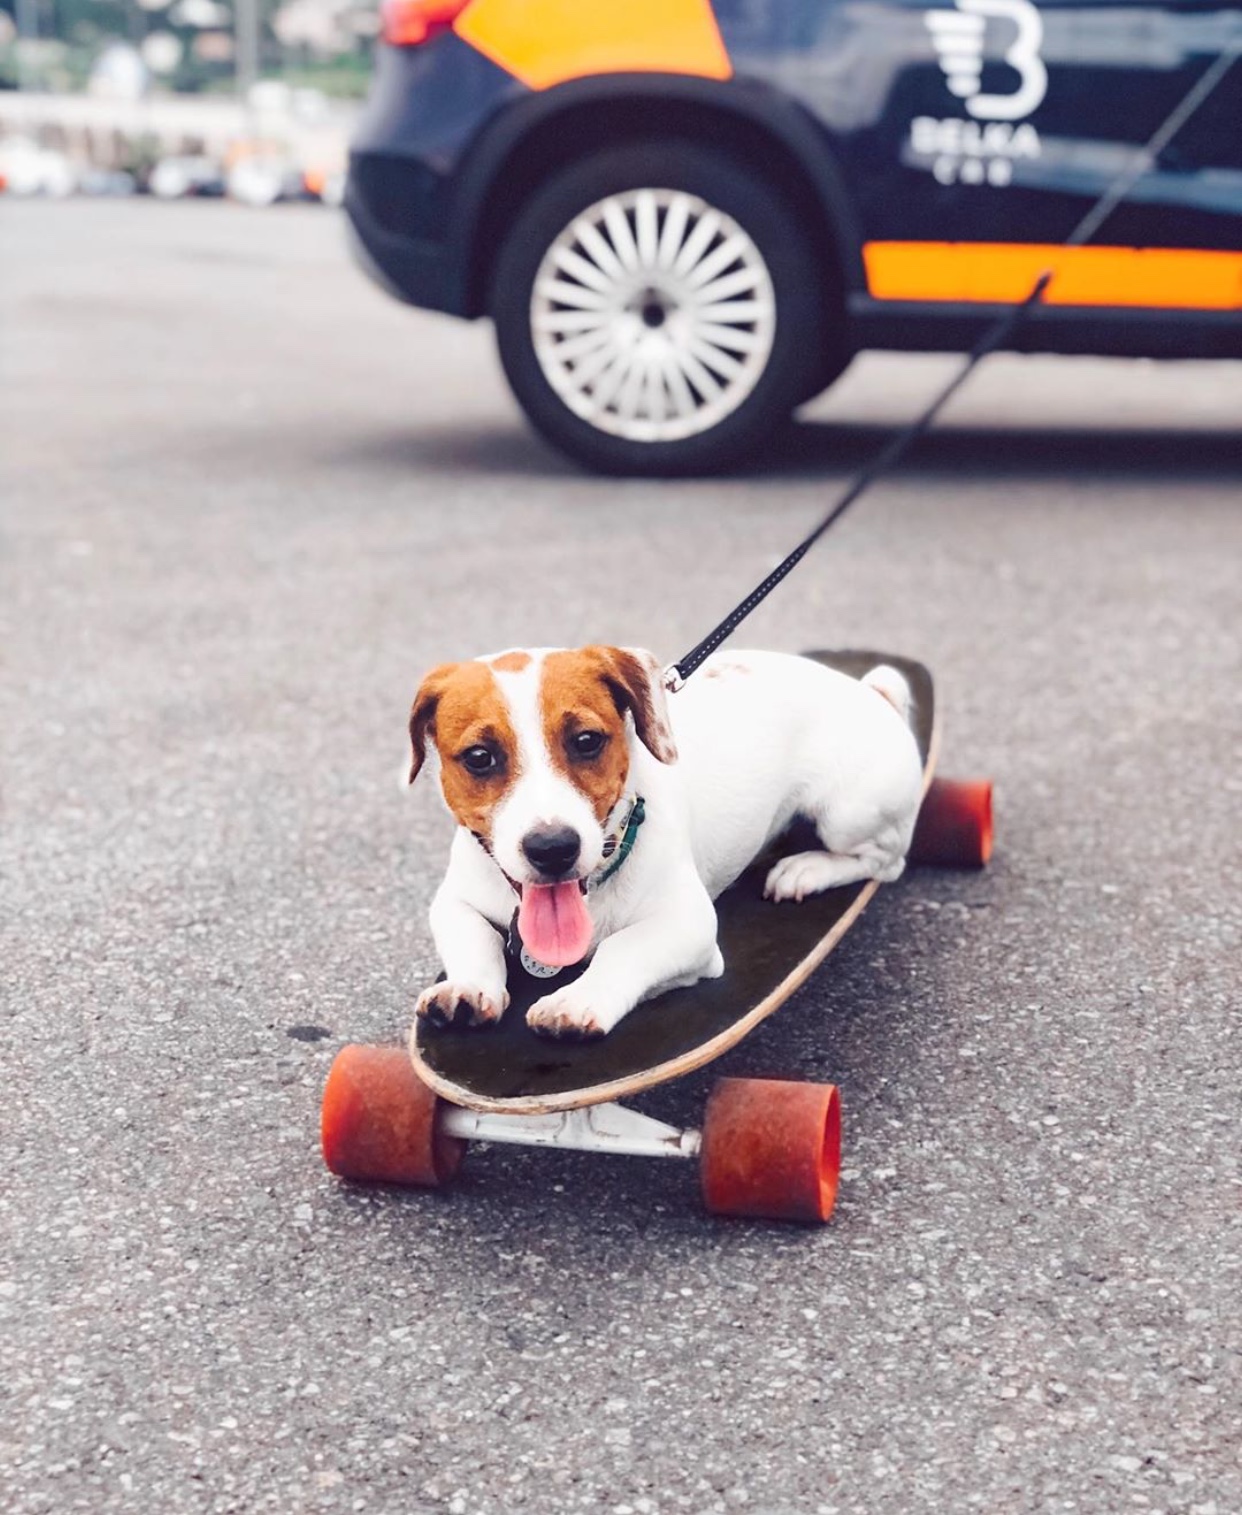 Jack Russell Terrier lying on the skateboard in the parking lot